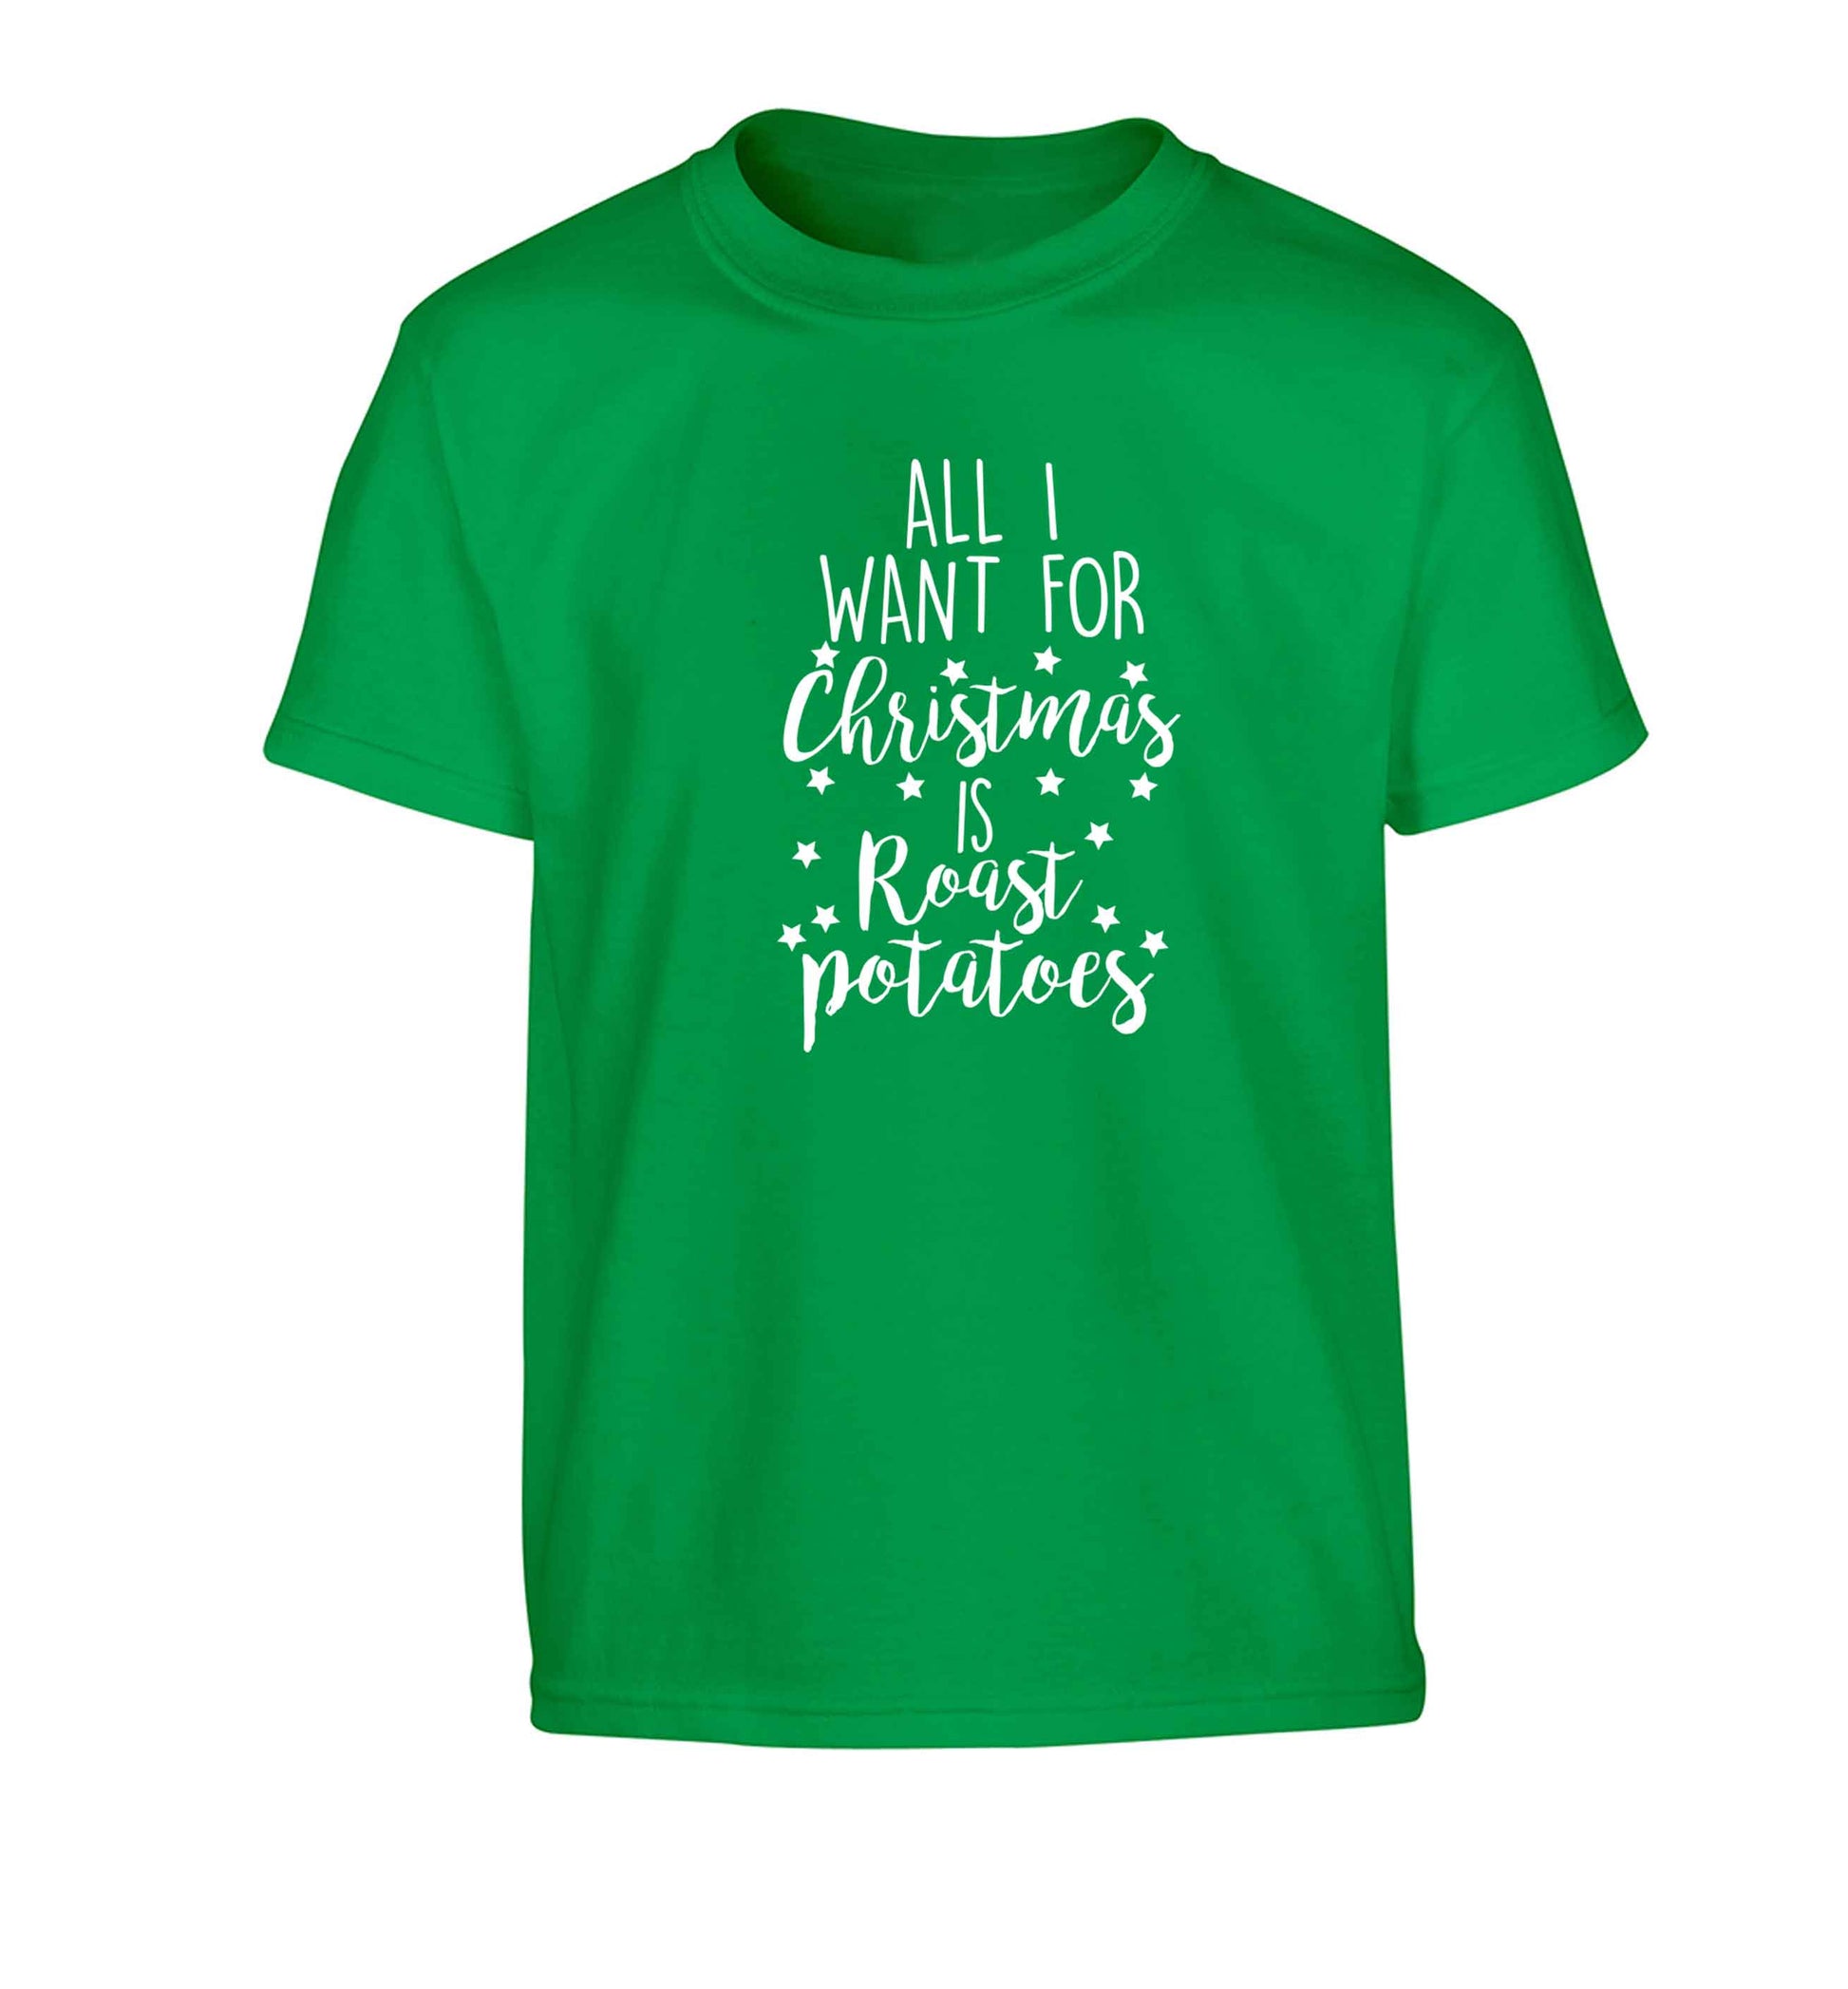 All I want for Christmas is roast potatoes Children's green Tshirt 12-13 Years